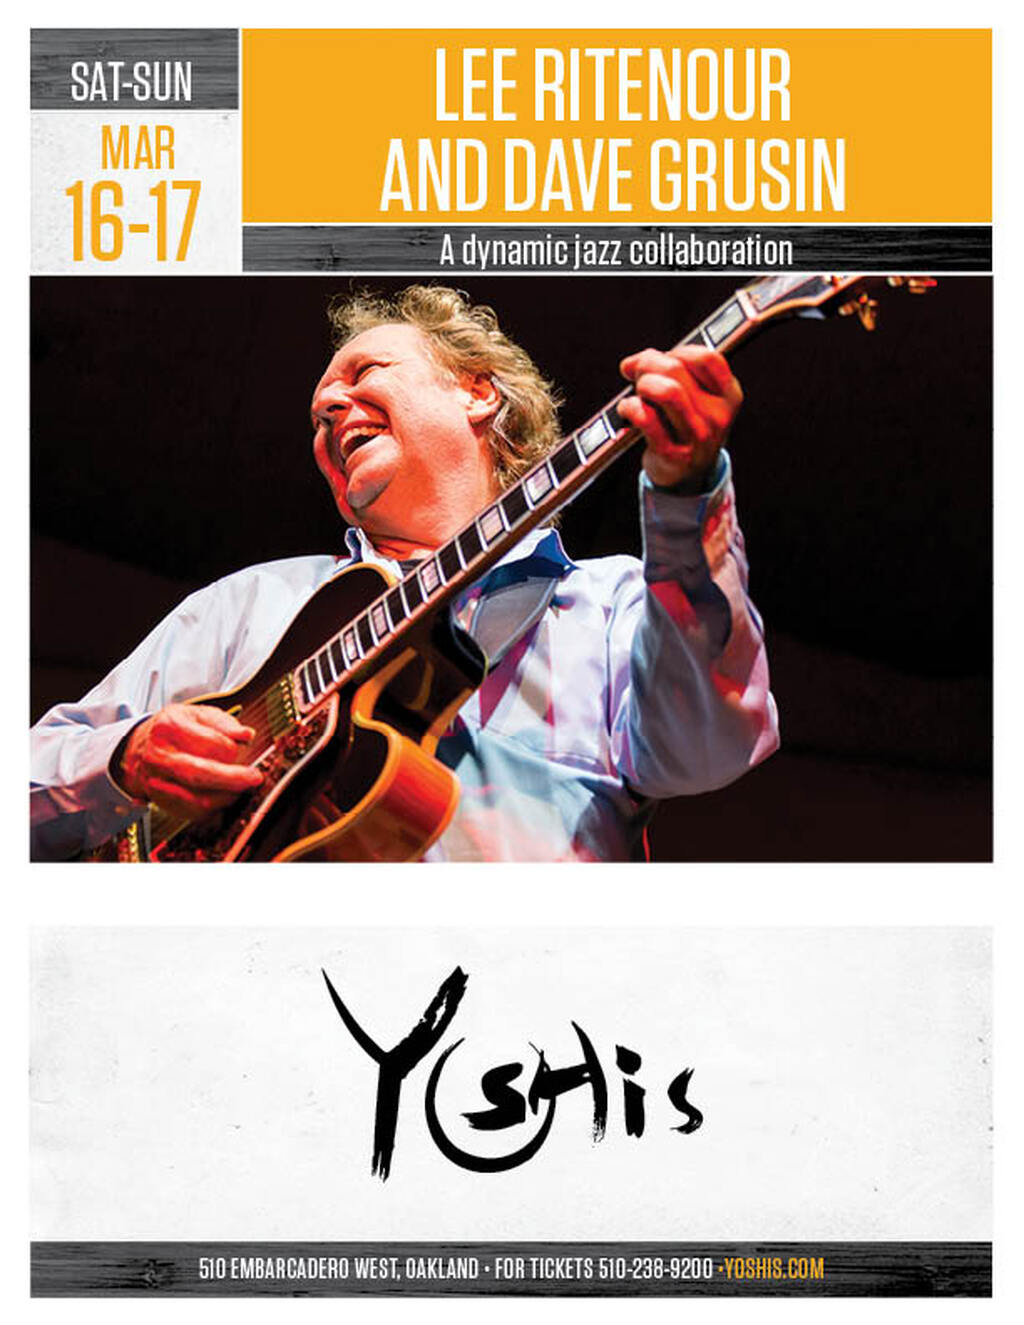 Yoshi s SAT SUN Jazz Event at Yoshi s  Featuring LEE RITENOUR and DAVE GRUSIN promotion flier on Digifli com